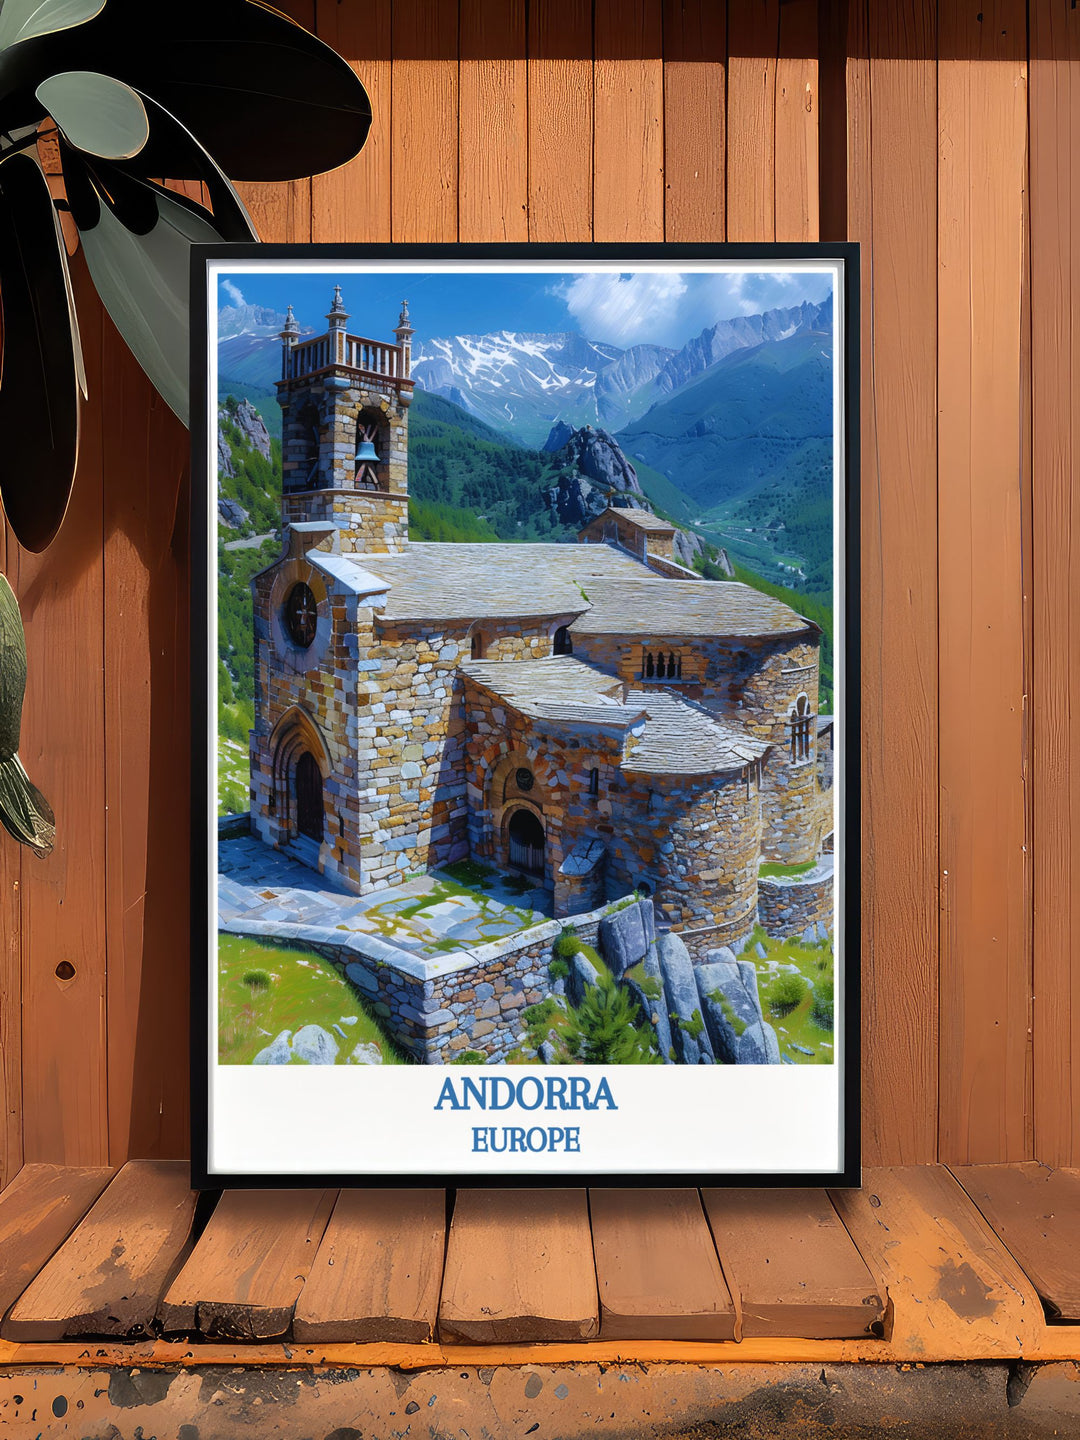 Canvas print featuring the iconic Sant Joan de Caselles Church set against the backdrop of Andorras lush valleys.